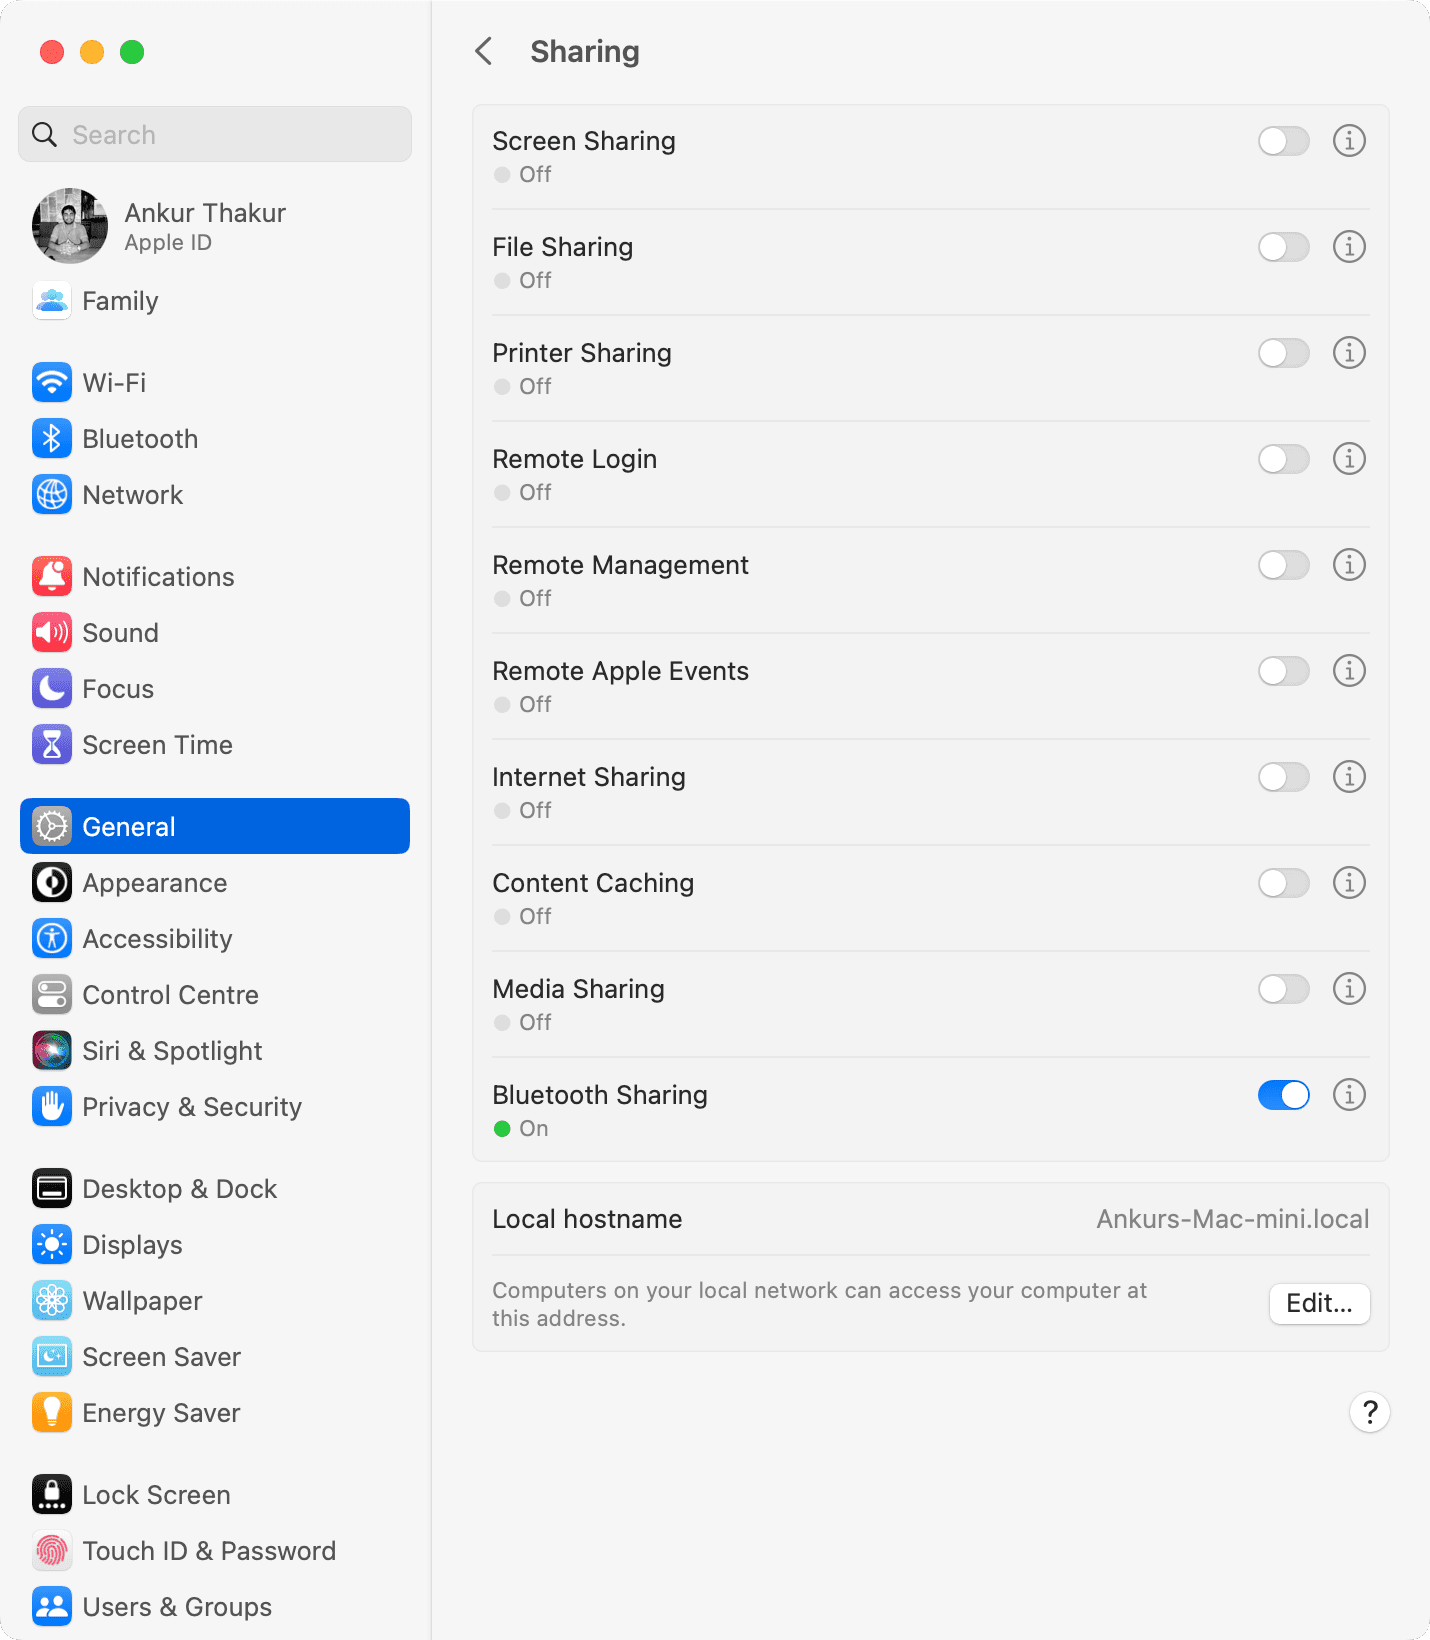 Sharing options in Mac System Settings